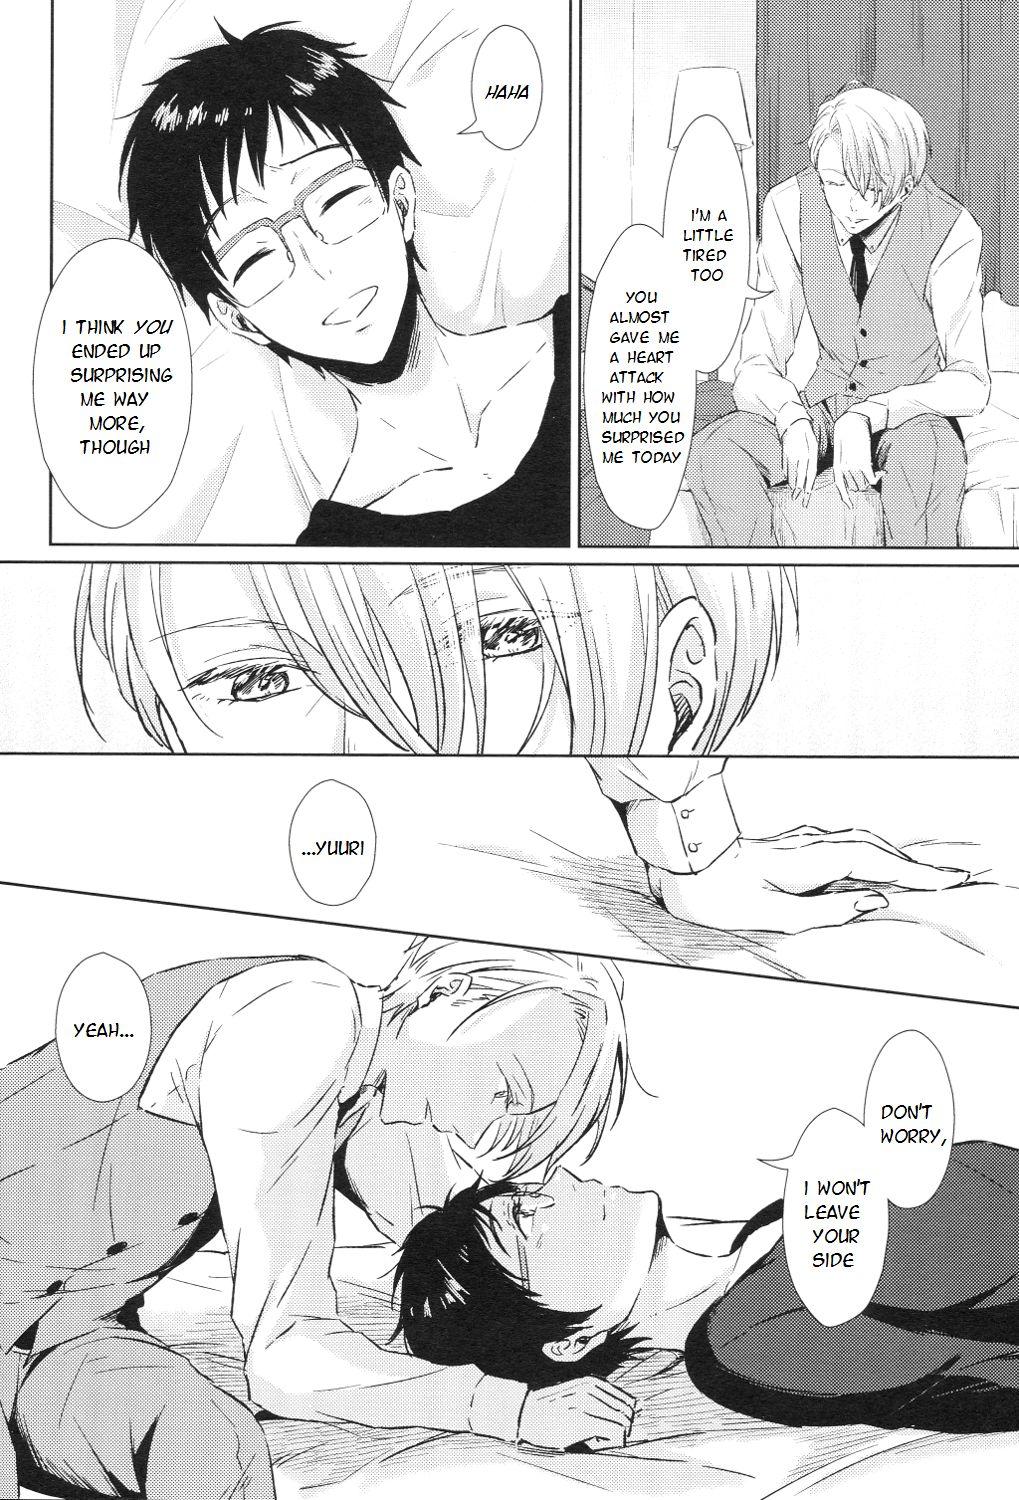 Butts Ai o Tabanete Tsutaetai | I want to convey my love for you - Yuri on ice Ink - Page 4